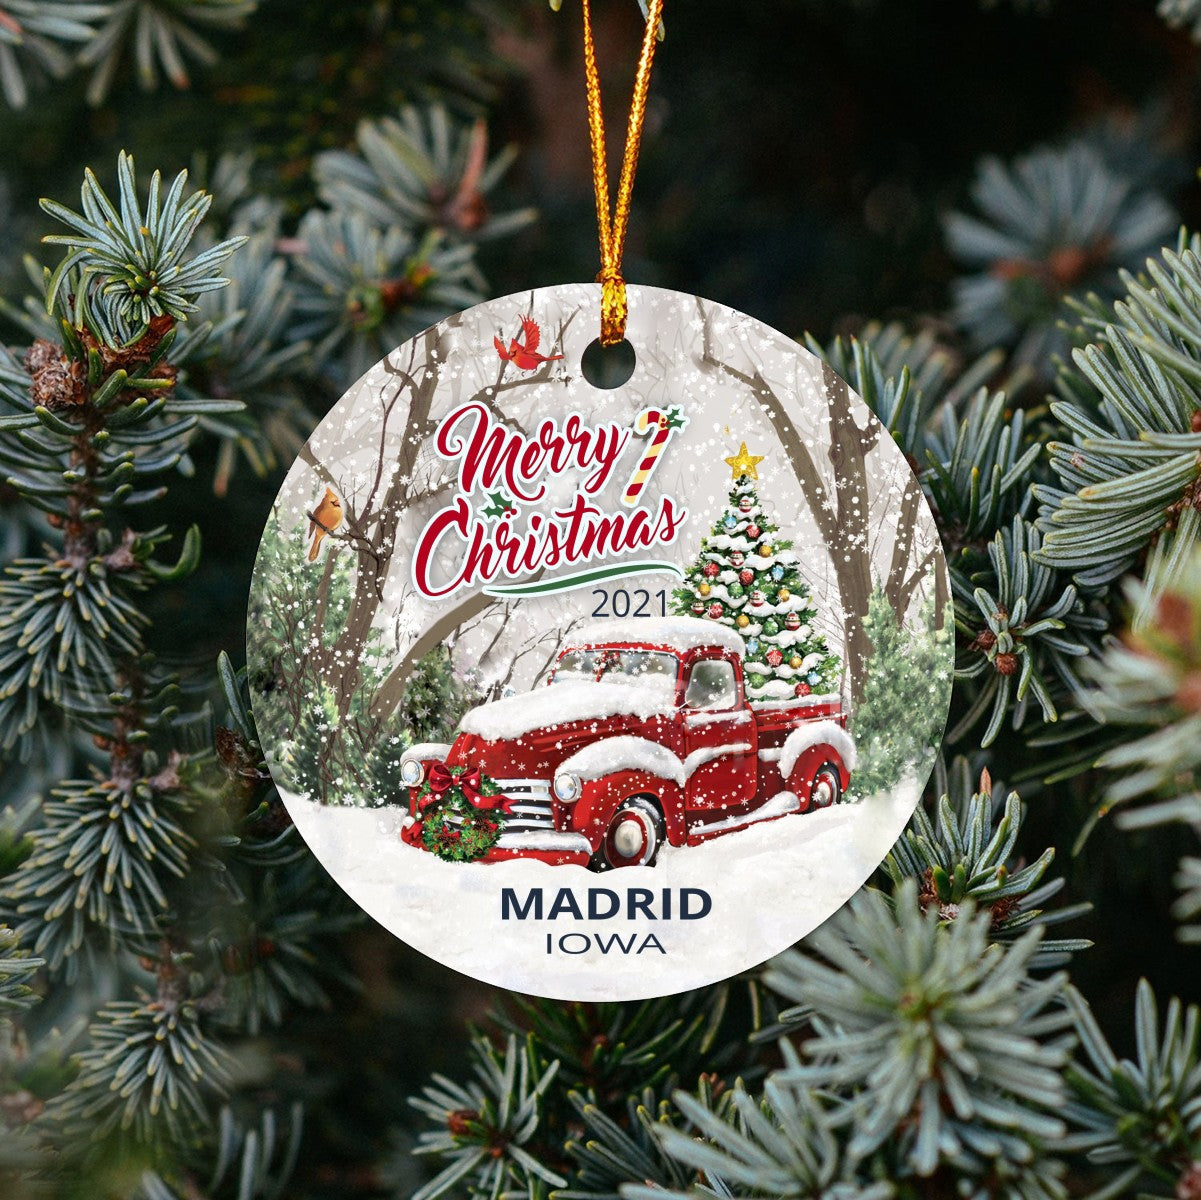 Christmas Tree Ornaments Madrid - Ornament With Name City, State Madrid Iowa IA Ornament - Red Truck Xmas Ornaments 3'' Plastic Gift For Family, Friend And Housewarming